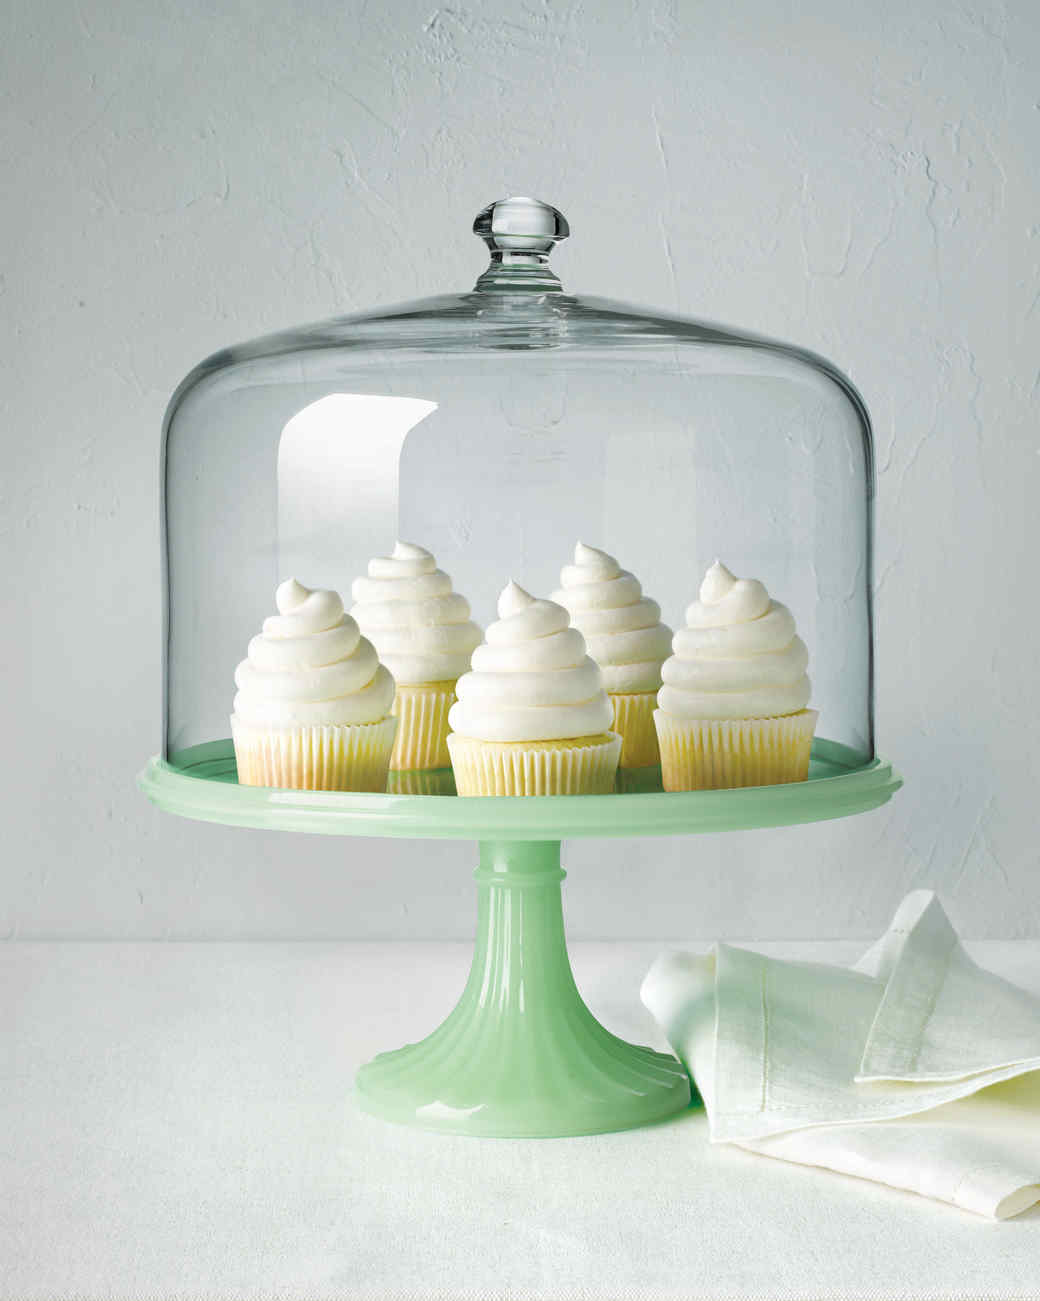 Show it Off! Our Favorite Cake Stands For Displaying Any